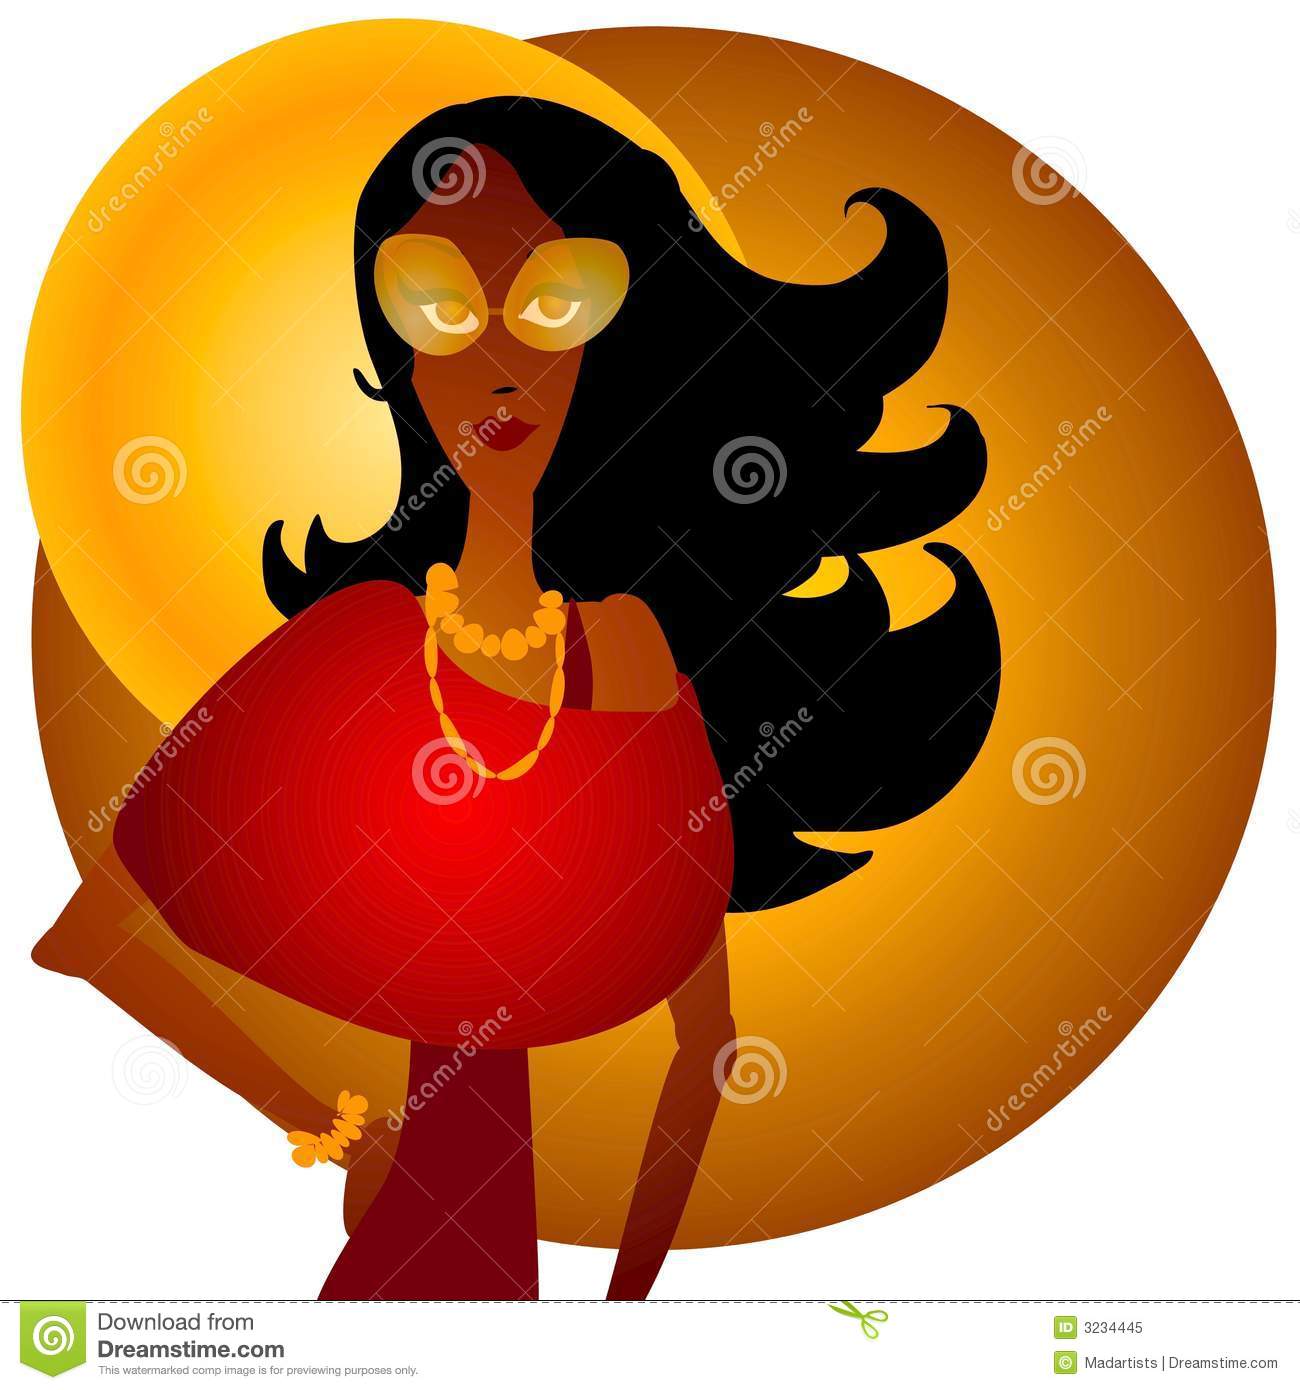 Clip Art Illustration Of An African American Woman Wearing Stylish